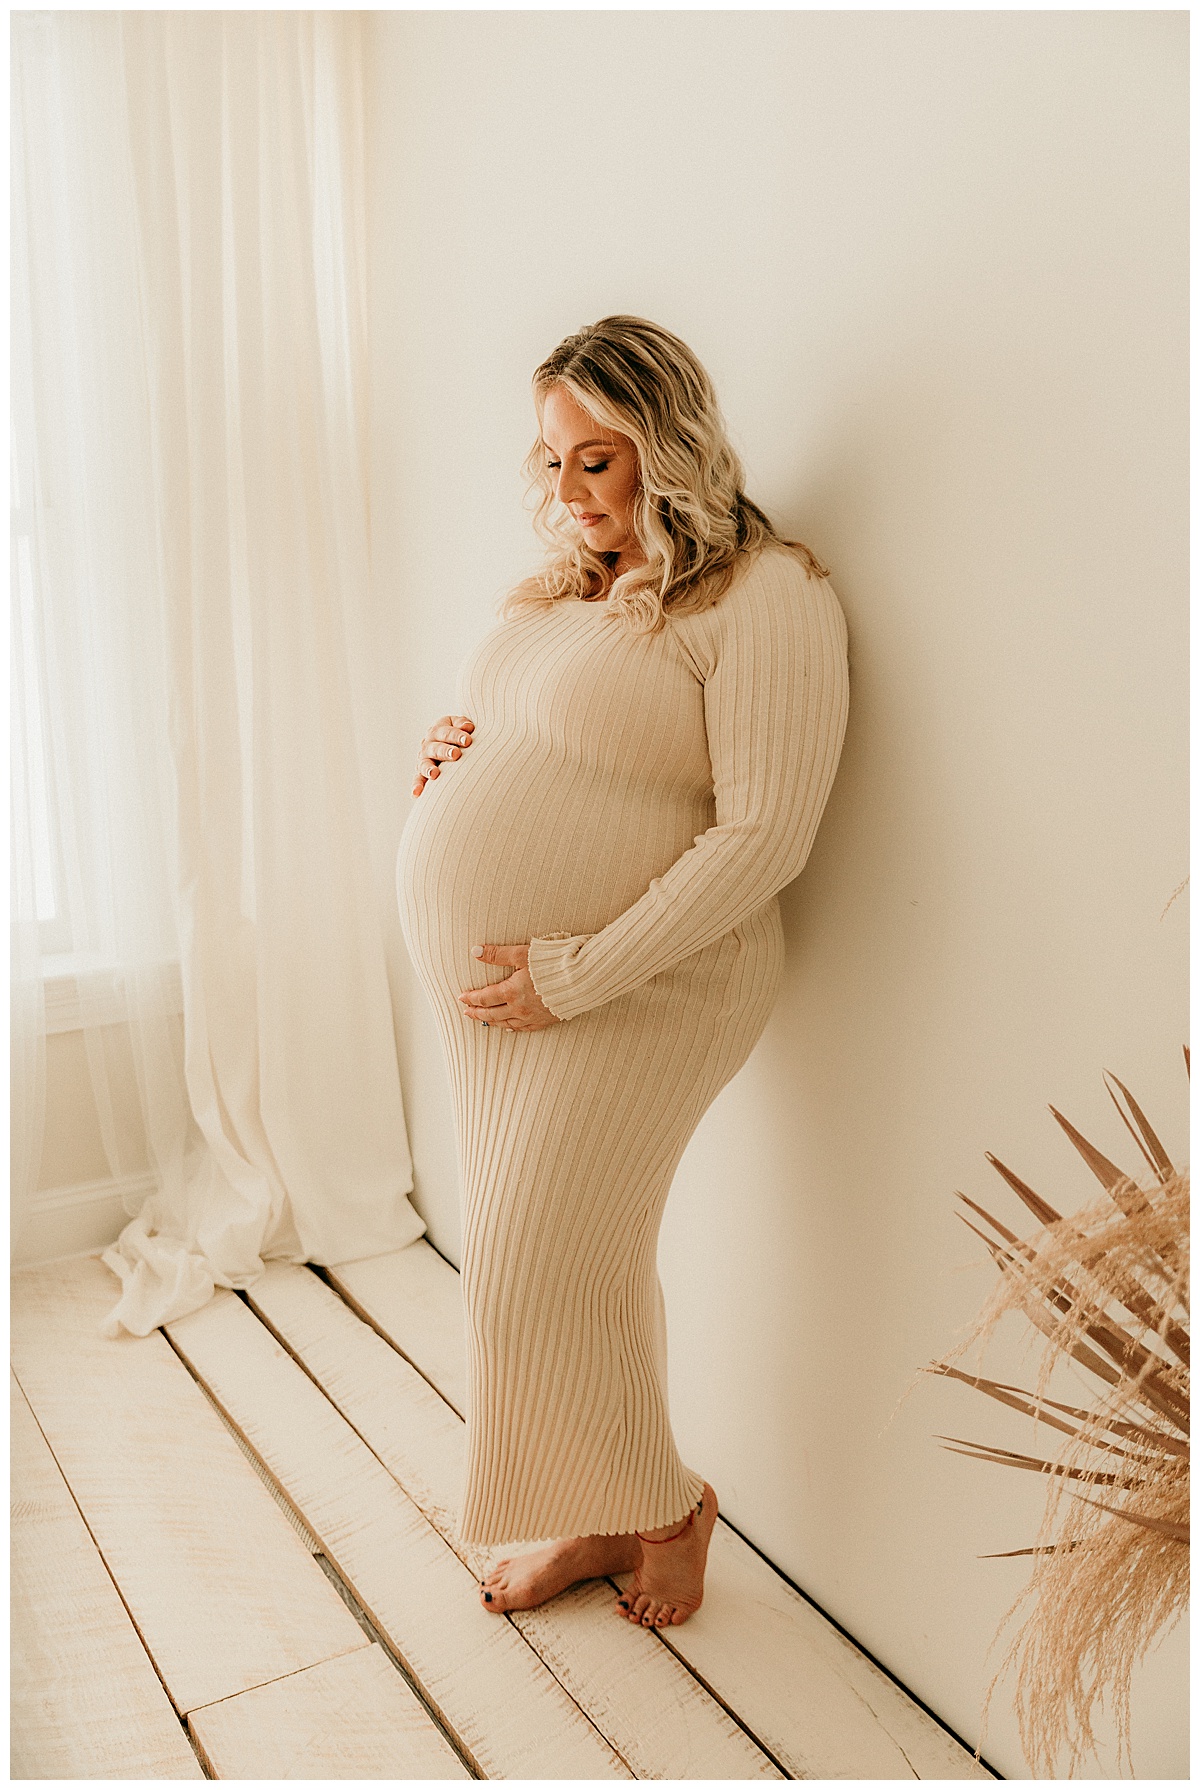 Proud mama looks down and miracle pregnant belly against wall for Norma Fayak Photography.Norma Fayak Photography.